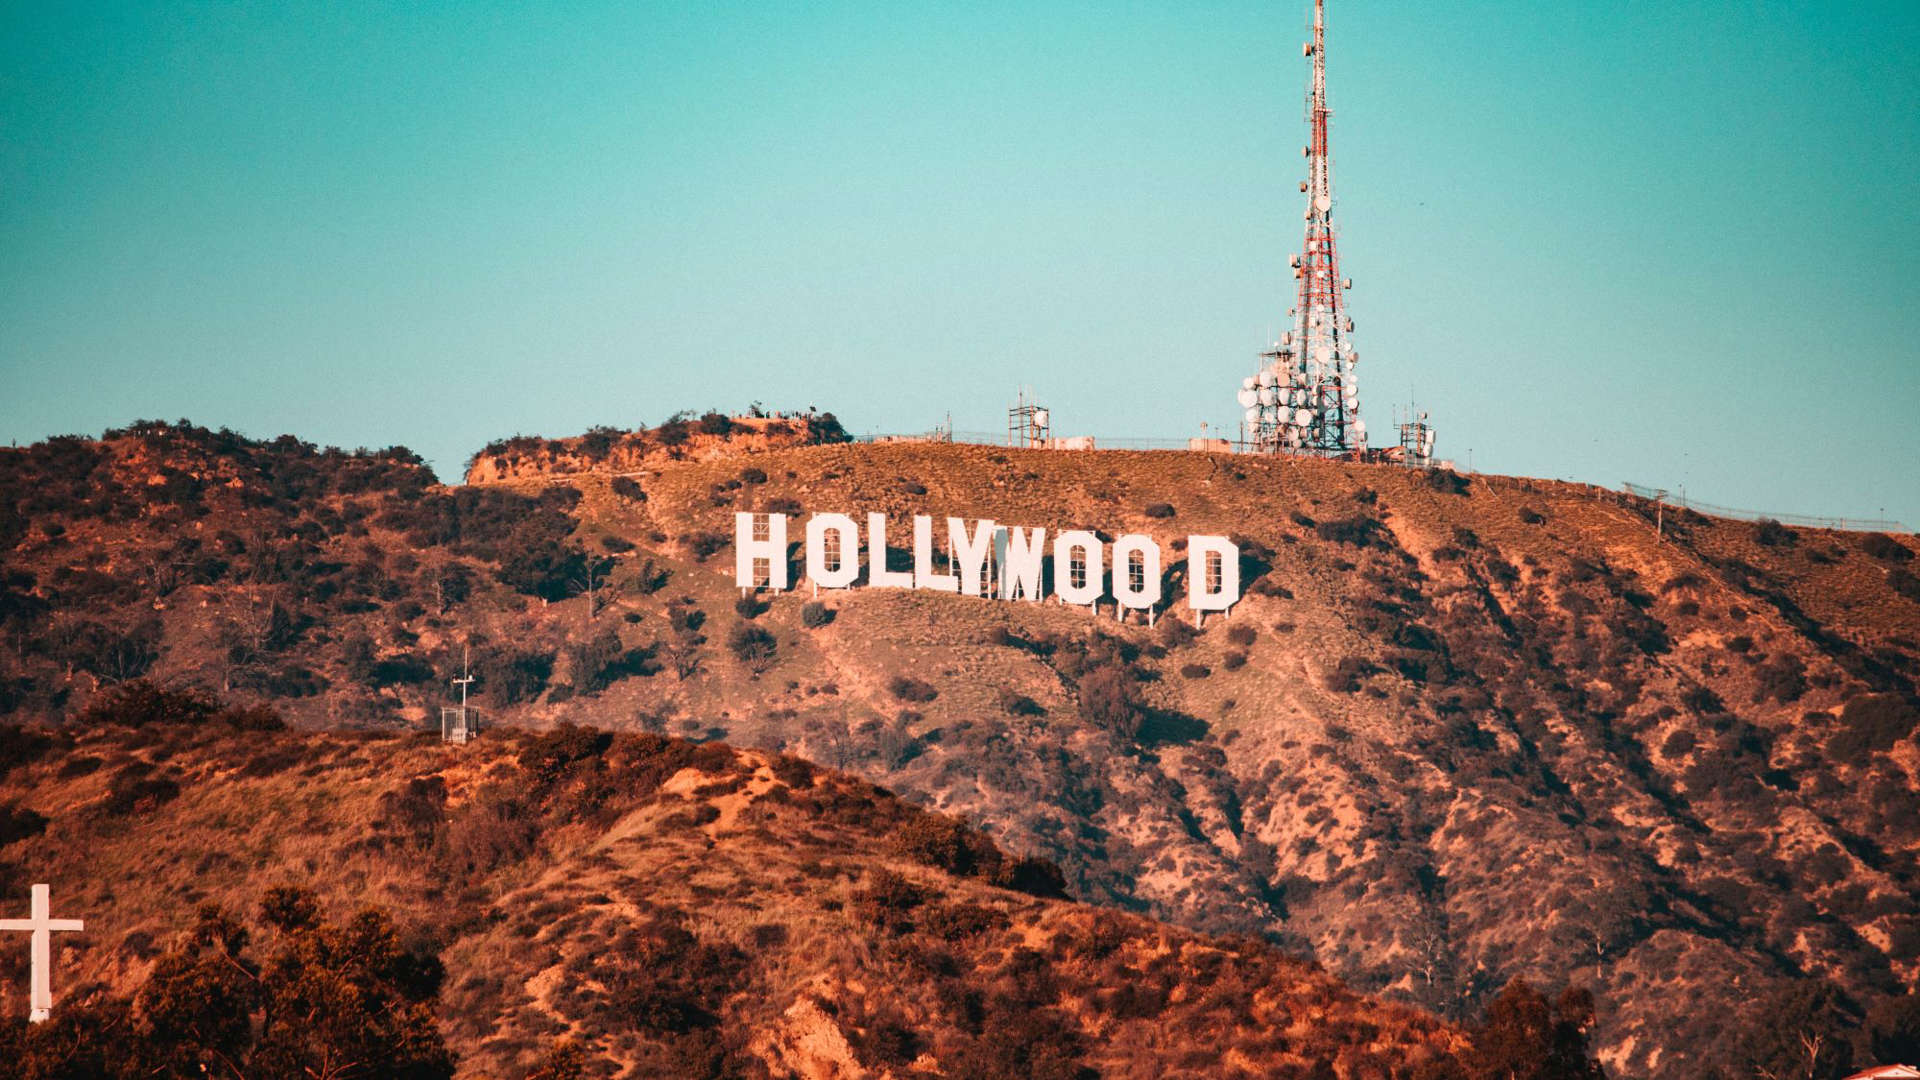 An image of the Hollywood sign.